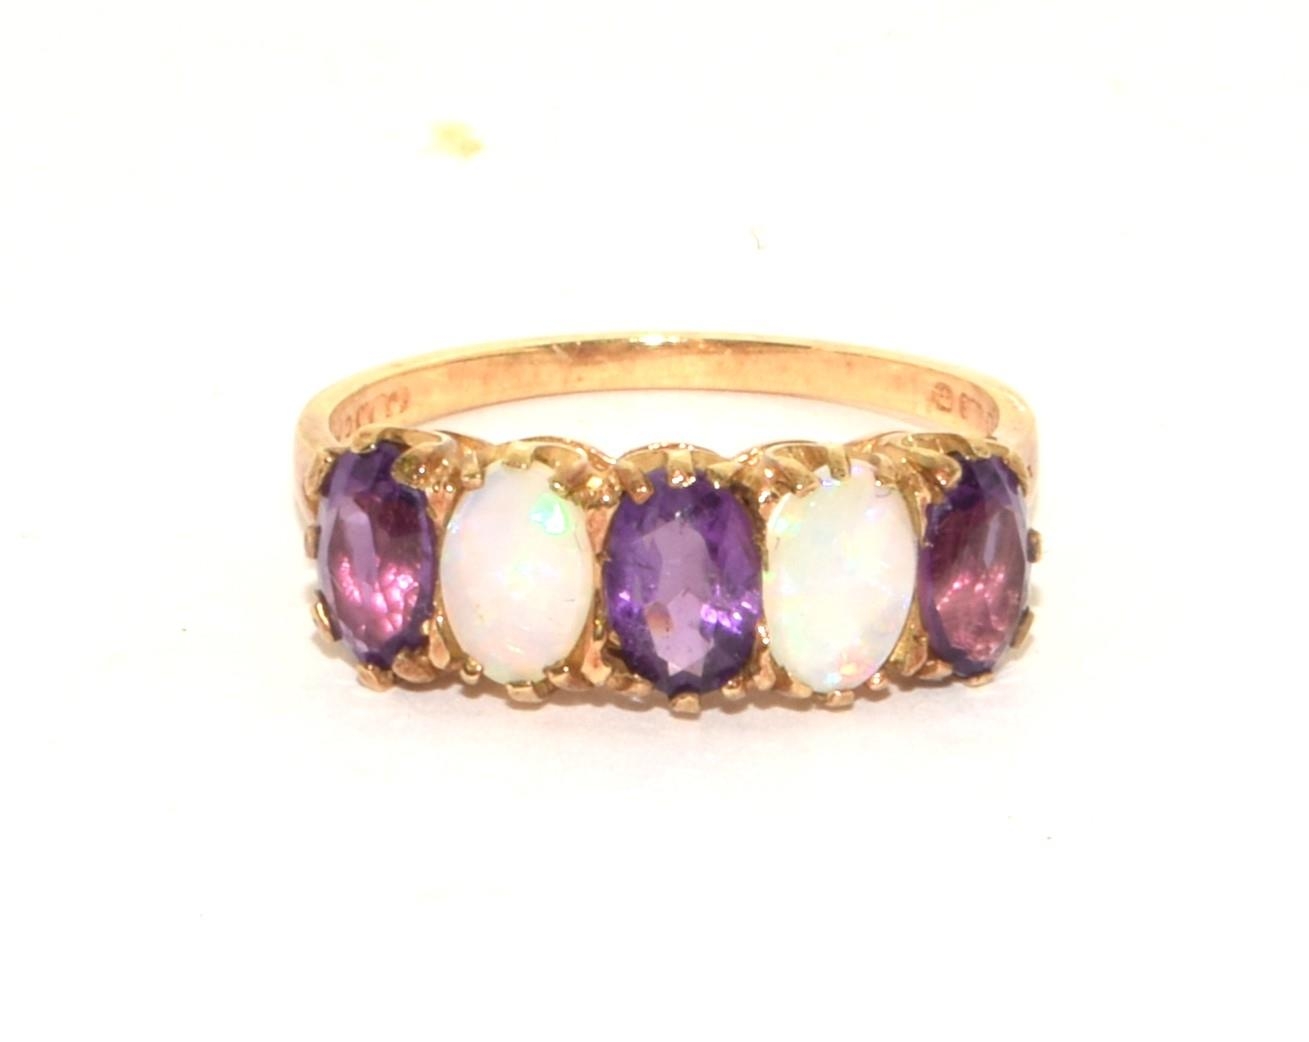 9ct gold Antique set Opal and Amethyst 5 stone ring size O - Image 5 of 5